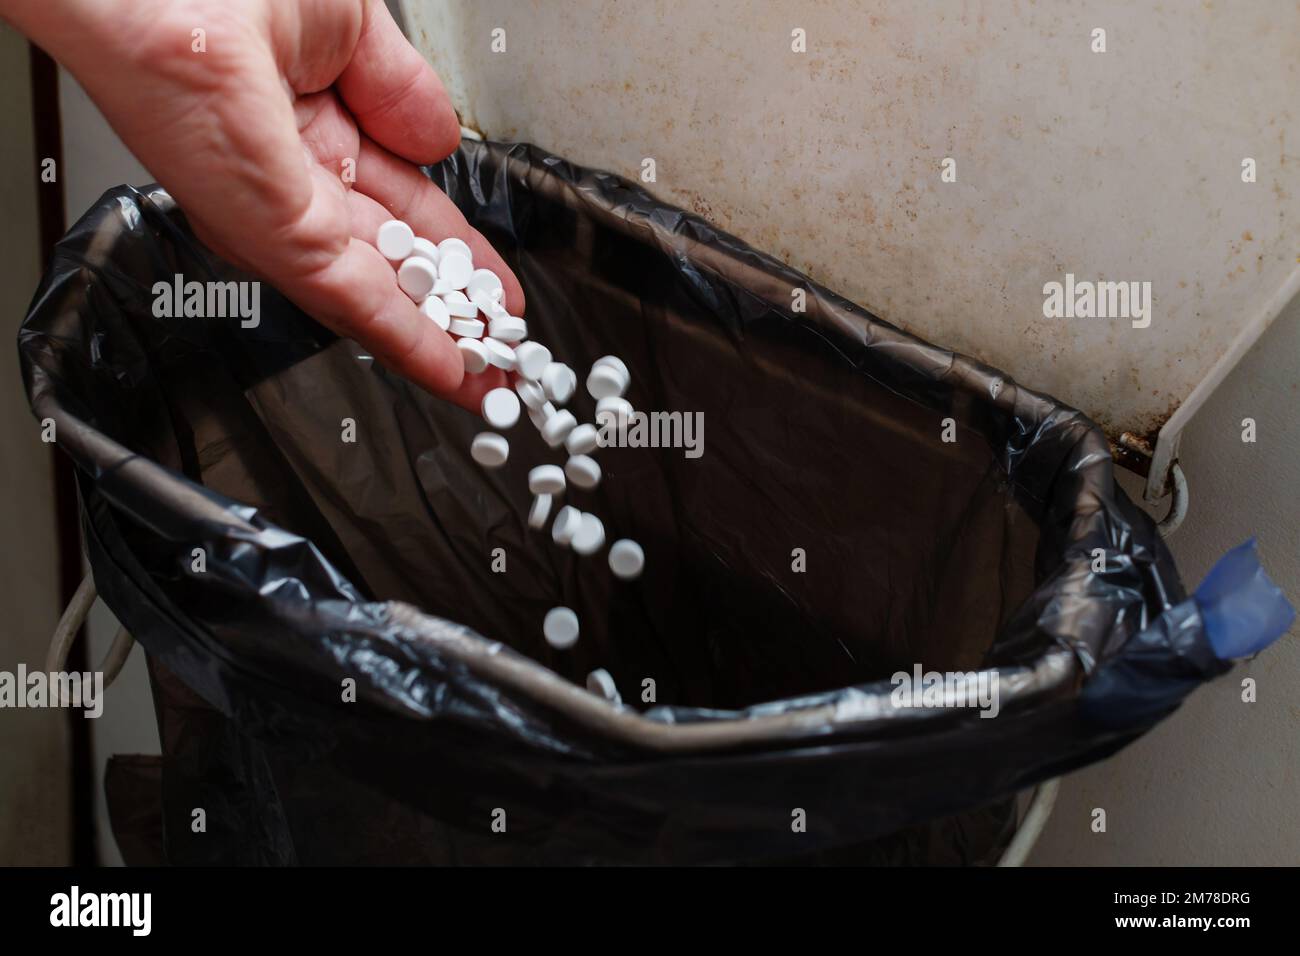 Hand throwing pills down a toilet Stock Photo - Alamy